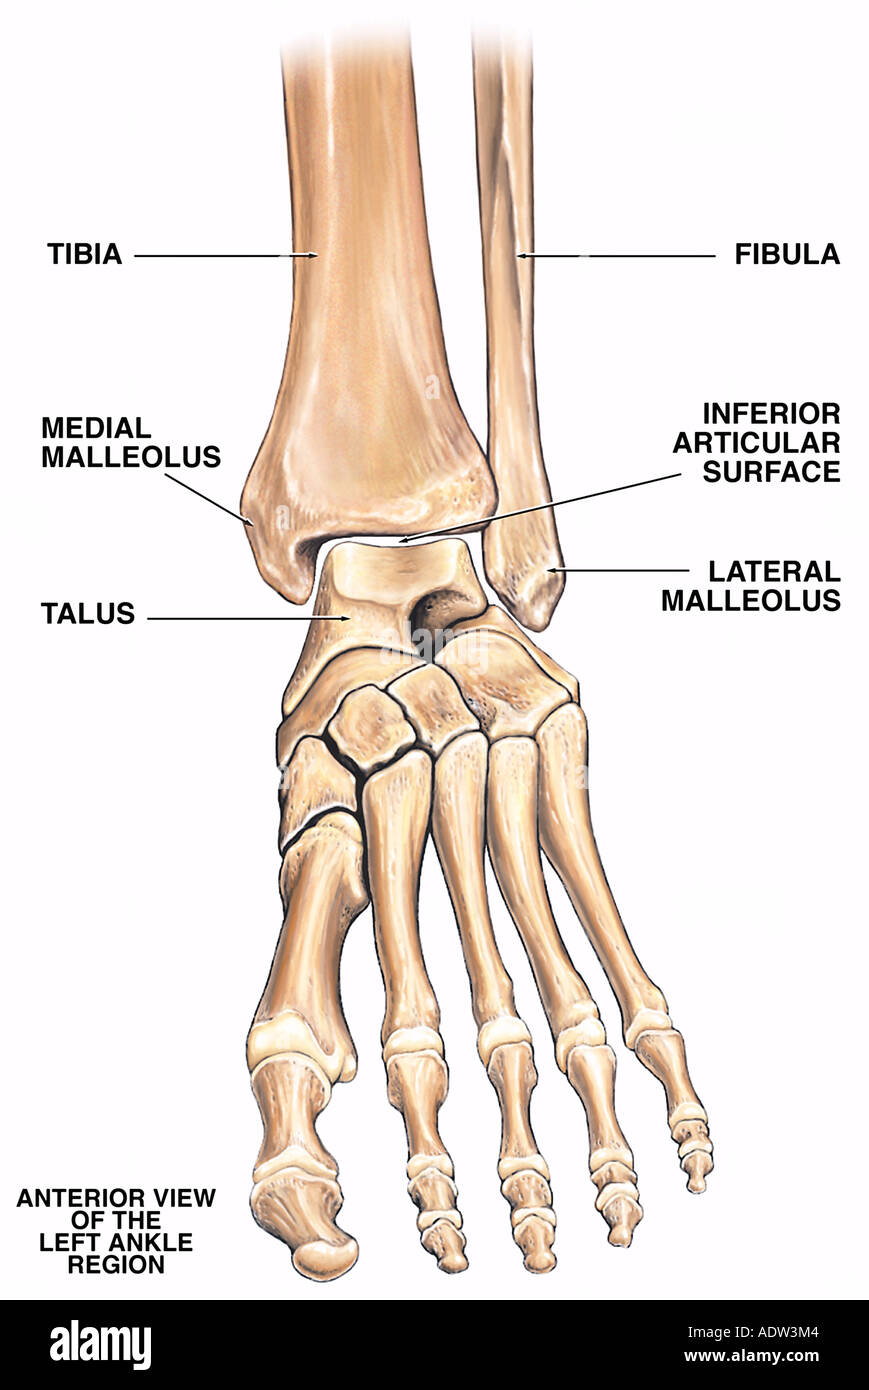 Lateral Malleolus High Resolution Stock Photography and Images - Alamy